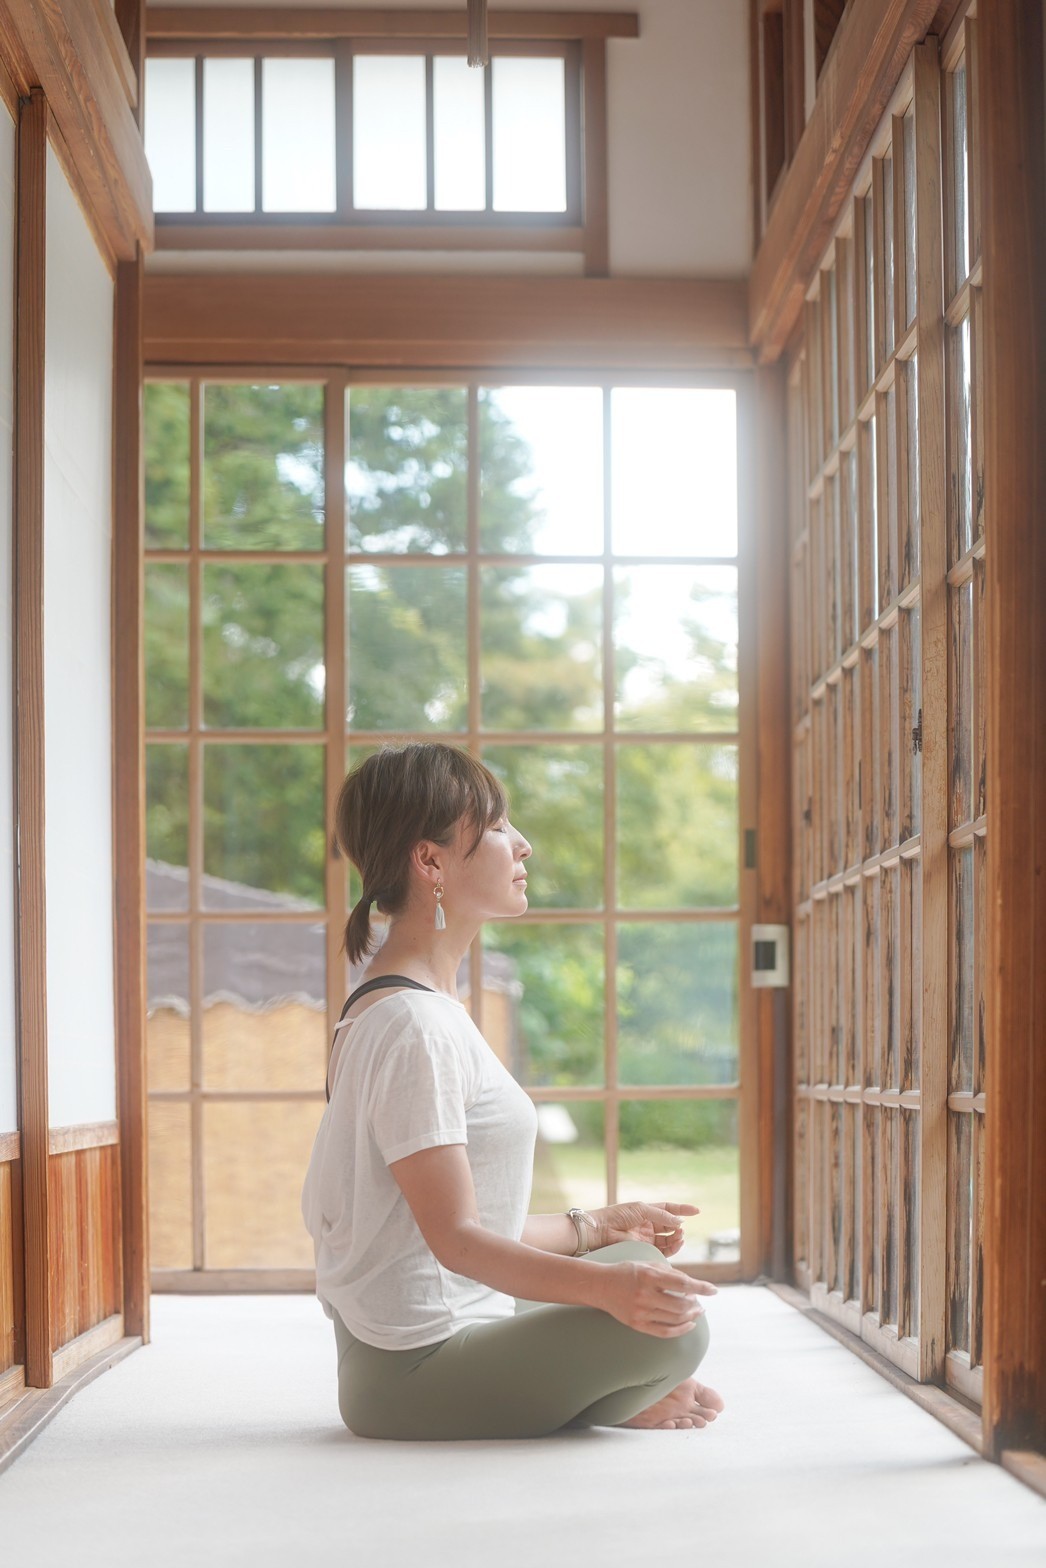 Morning Yoga Experience at the Count Uesugi's Residence